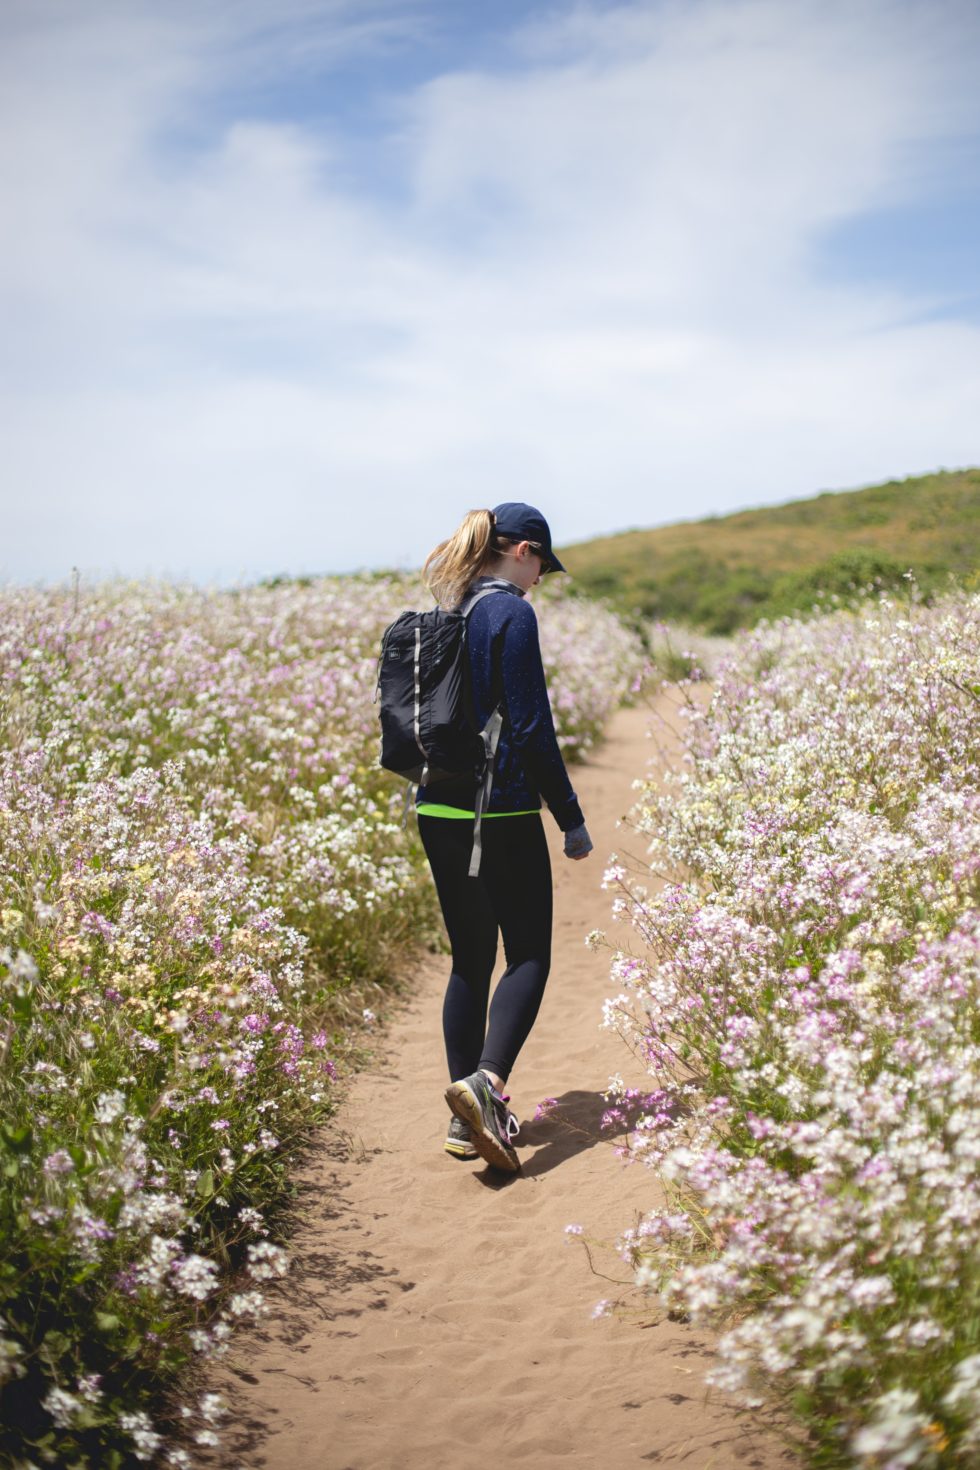 Did you know that walking every day can increase your happiness? Find out my tips for getting out to walk more often for improved emotional and physical health.